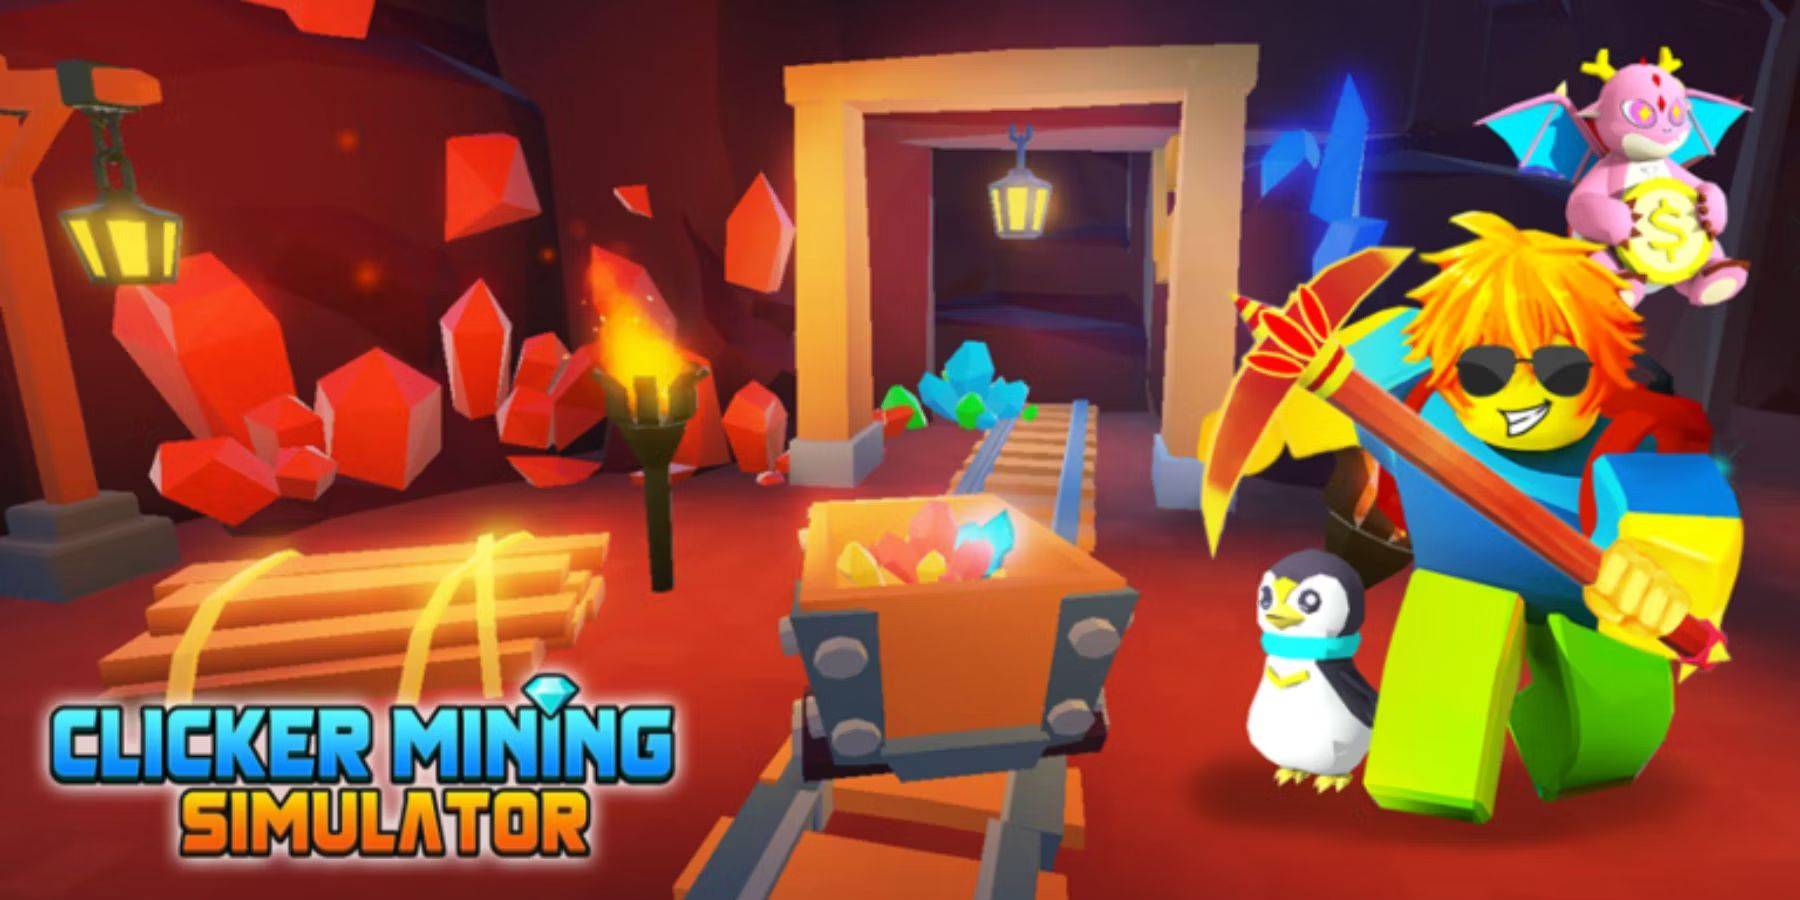 Mining Simulator Codes - Free tokens, crates, eggs! (March ) - Pro Game Guides